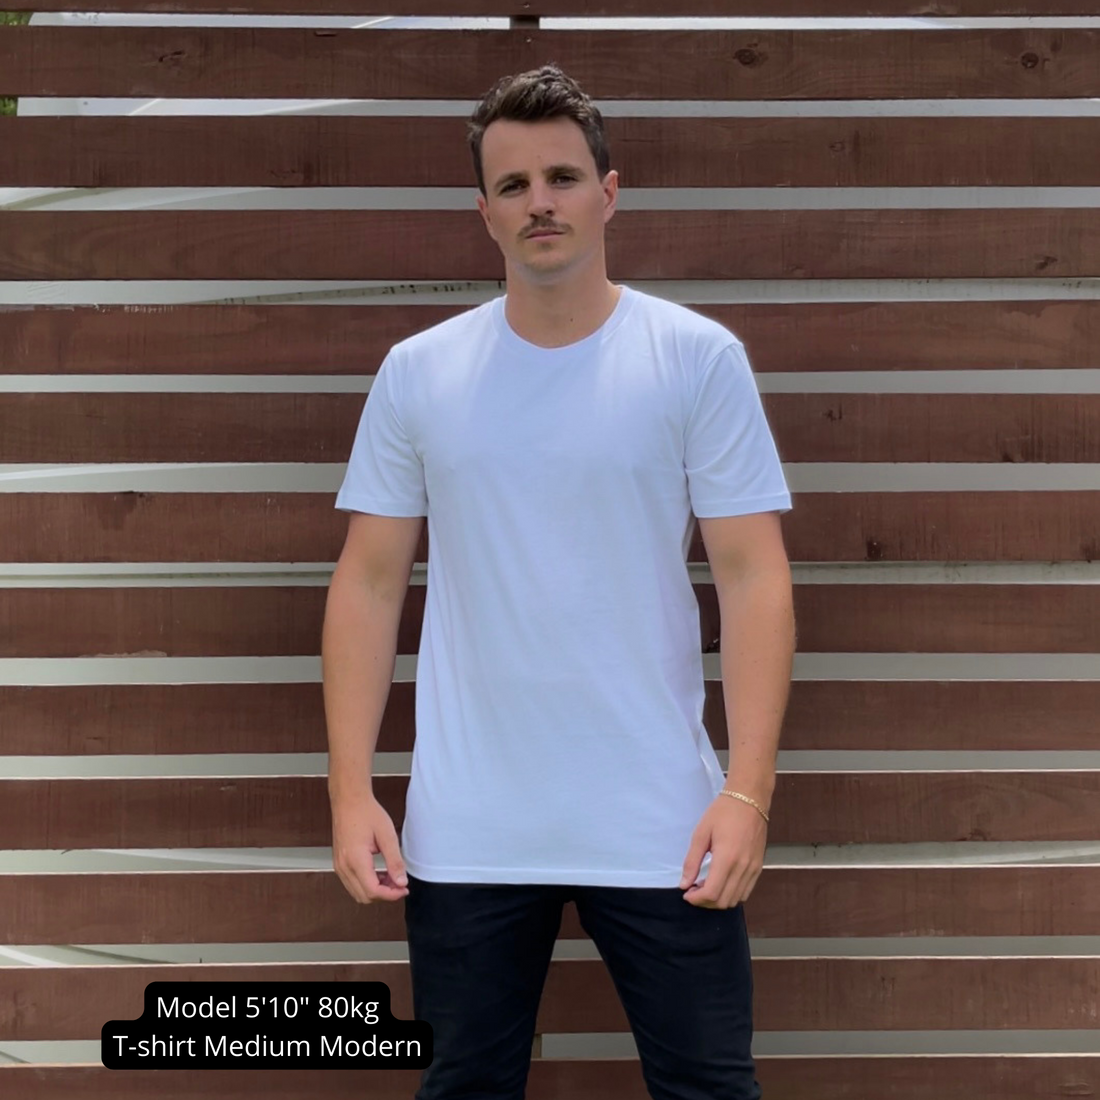 What to Wear with a White T-shirt